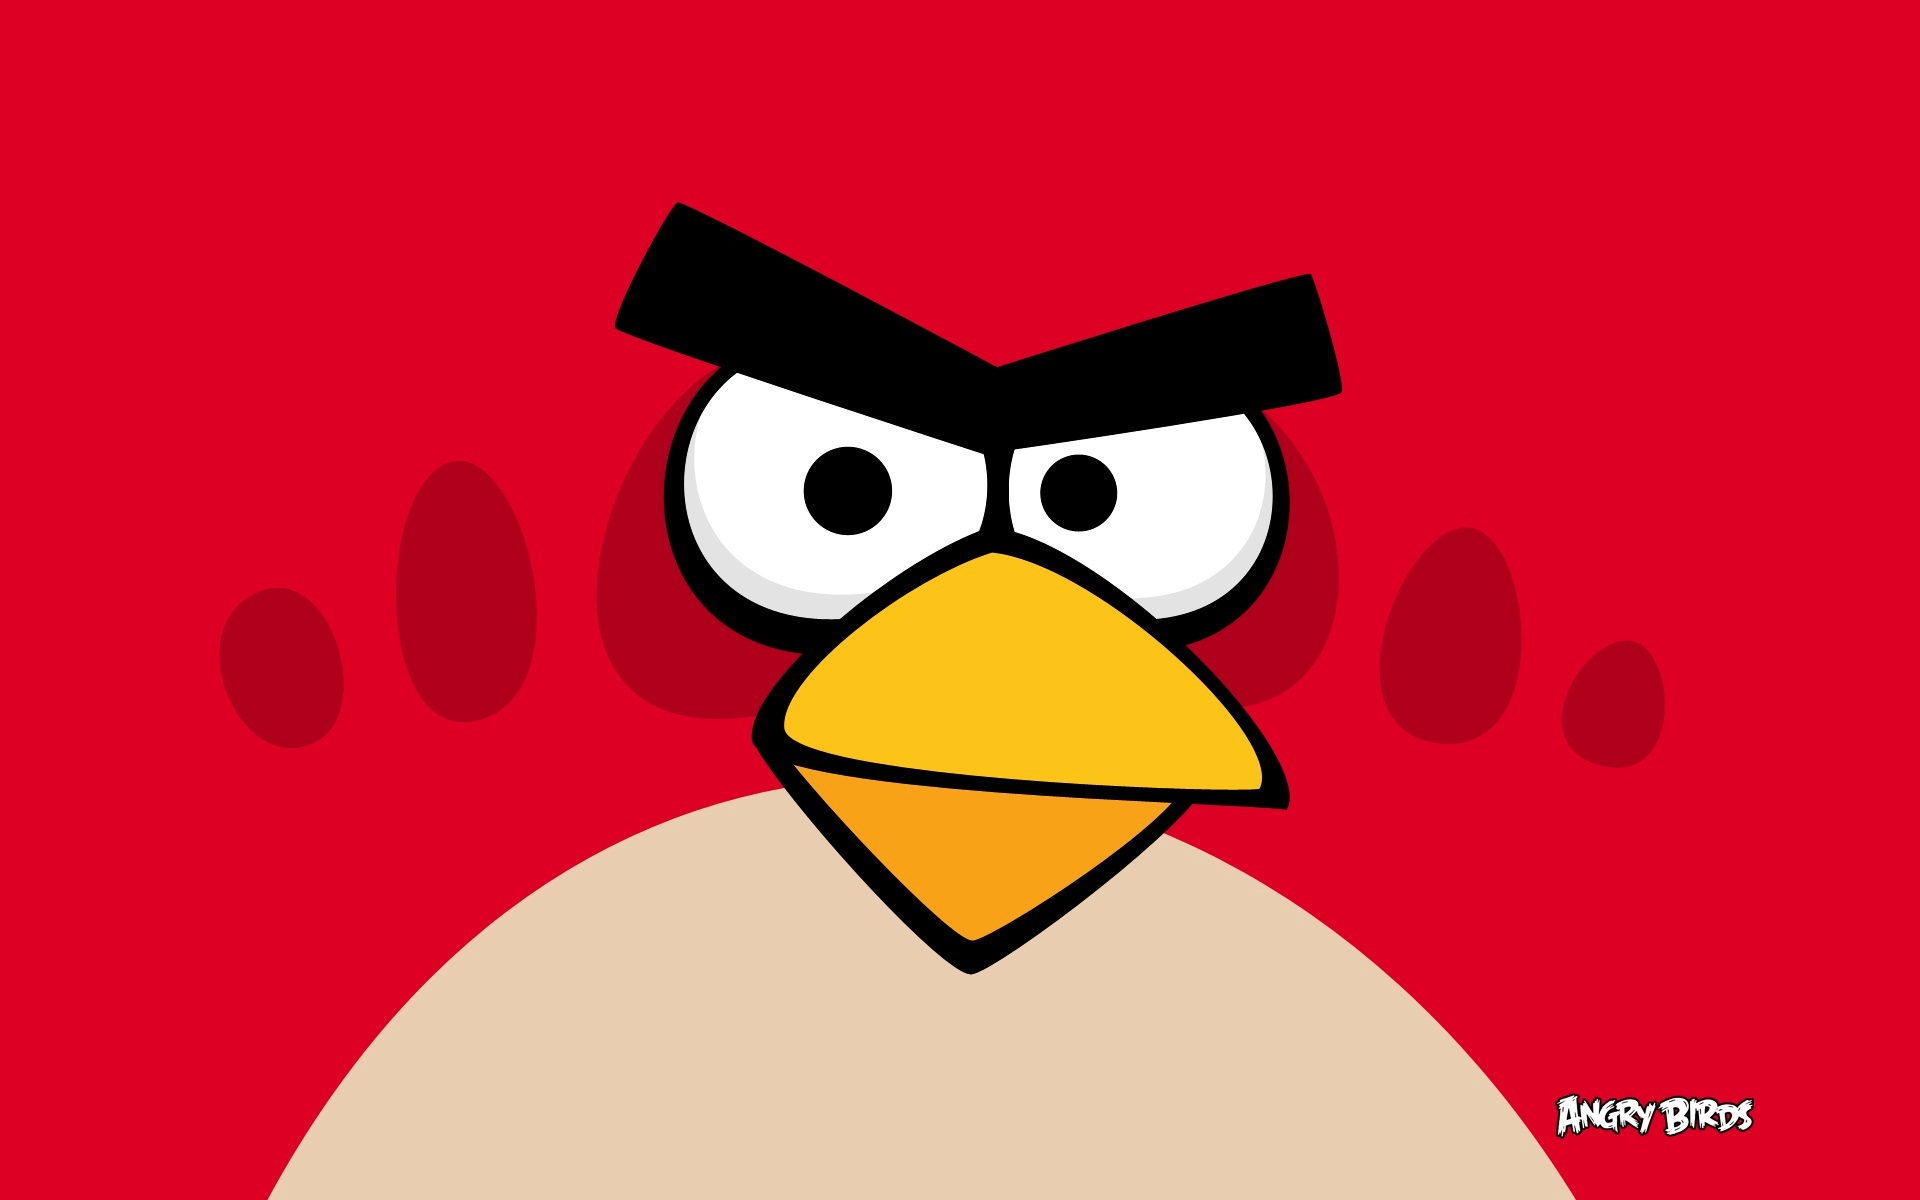 Angry Birds Wallpaper HD Wallpaper Free Download 10 Angry Birds Theme